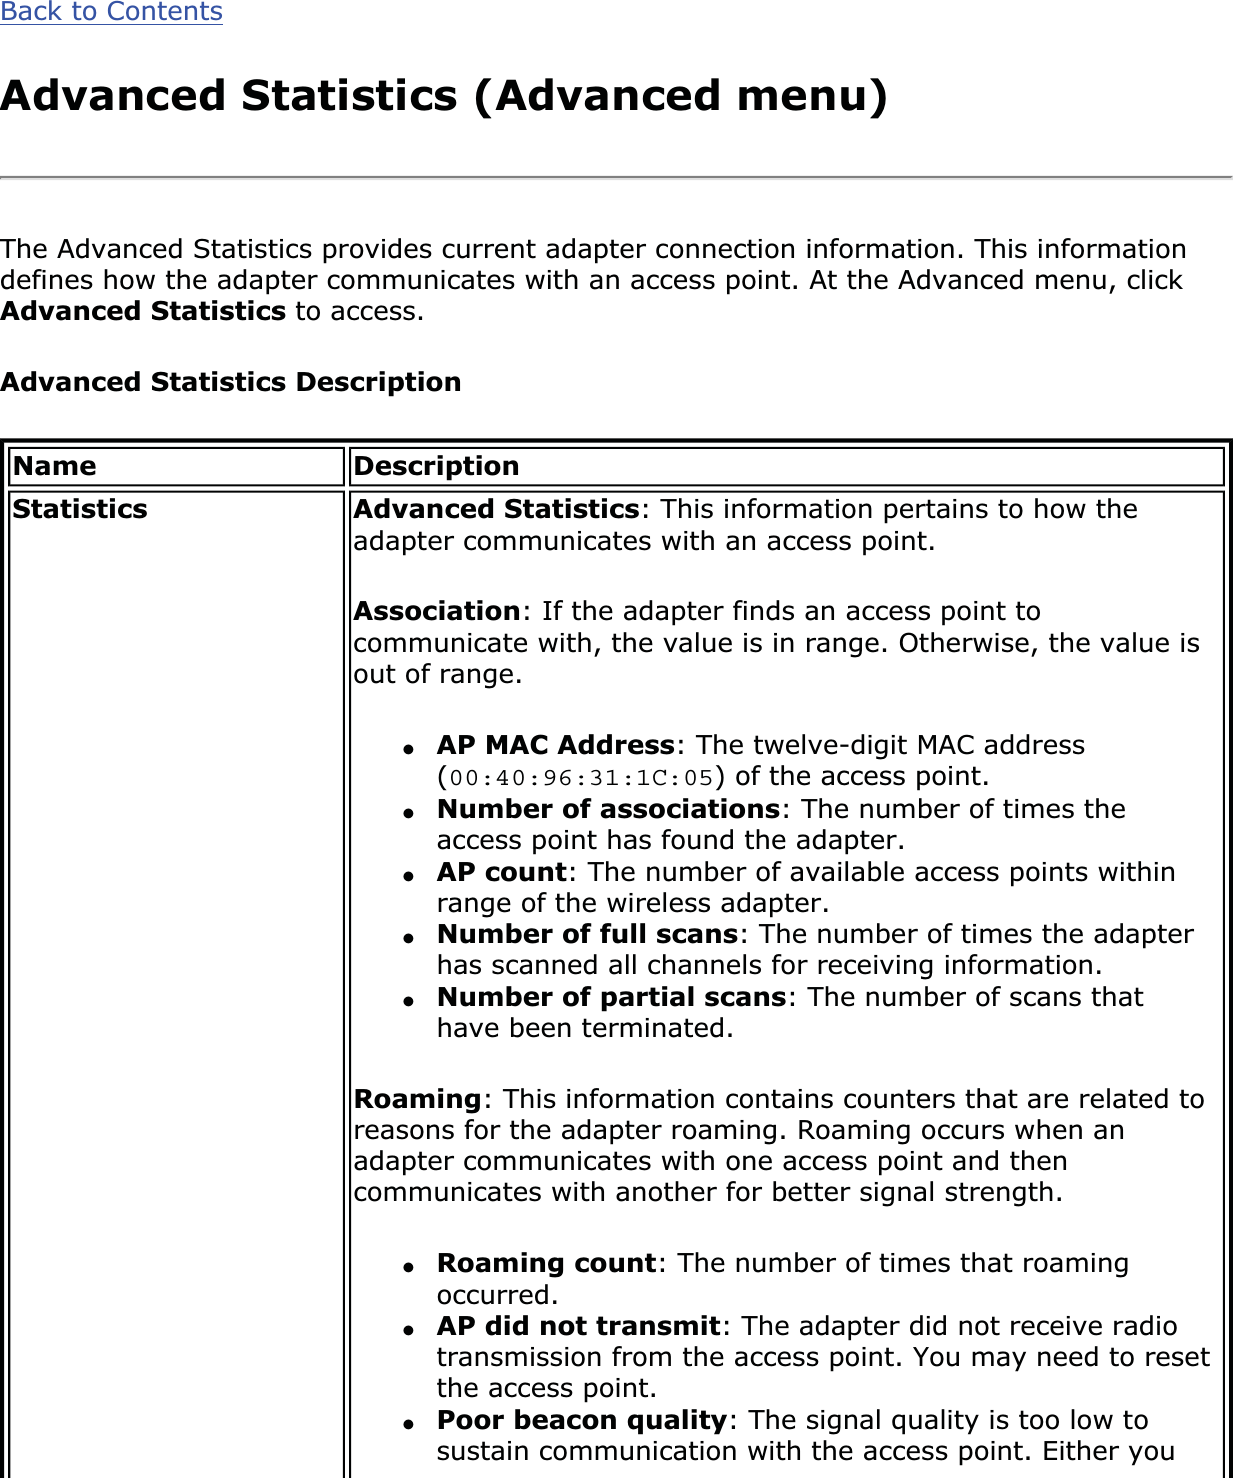 Back to ContentsAdvanced Statistics (Advanced menu)The Advanced Statistics provides current adapter connection information. This information defines how the adapter communicates with an access point. At the Advanced menu, click Advanced Statistics to access. Advanced Statistics DescriptionName DescriptionStatistics Advanced Statistics: This information pertains to how the adapter communicates with an access point.Association: If the adapter finds an access point to communicate with, the value is in range. Otherwise, the value is out of range.●AP MAC Address: The twelve-digit MAC address (00:40:96:31:1C:05) of the access point.●Number of associations: The number of times the access point has found the adapter.●AP count: The number of available access points within range of the wireless adapter.●Number of full scans: The number of times the adapter has scanned all channels for receiving information.●Number of partial scans: The number of scans that have been terminated.Roaming: This information contains counters that are related to reasons for the adapter roaming. Roaming occurs when an adapter communicates with one access point and then communicates with another for better signal strength.●Roaming count: The number of times that roaming occurred.●AP did not transmit: The adapter did not receive radio transmission from the access point. You may need to reset the access point.●Poor beacon quality: The signal quality is too low to sustain communication with the access point. Either you 